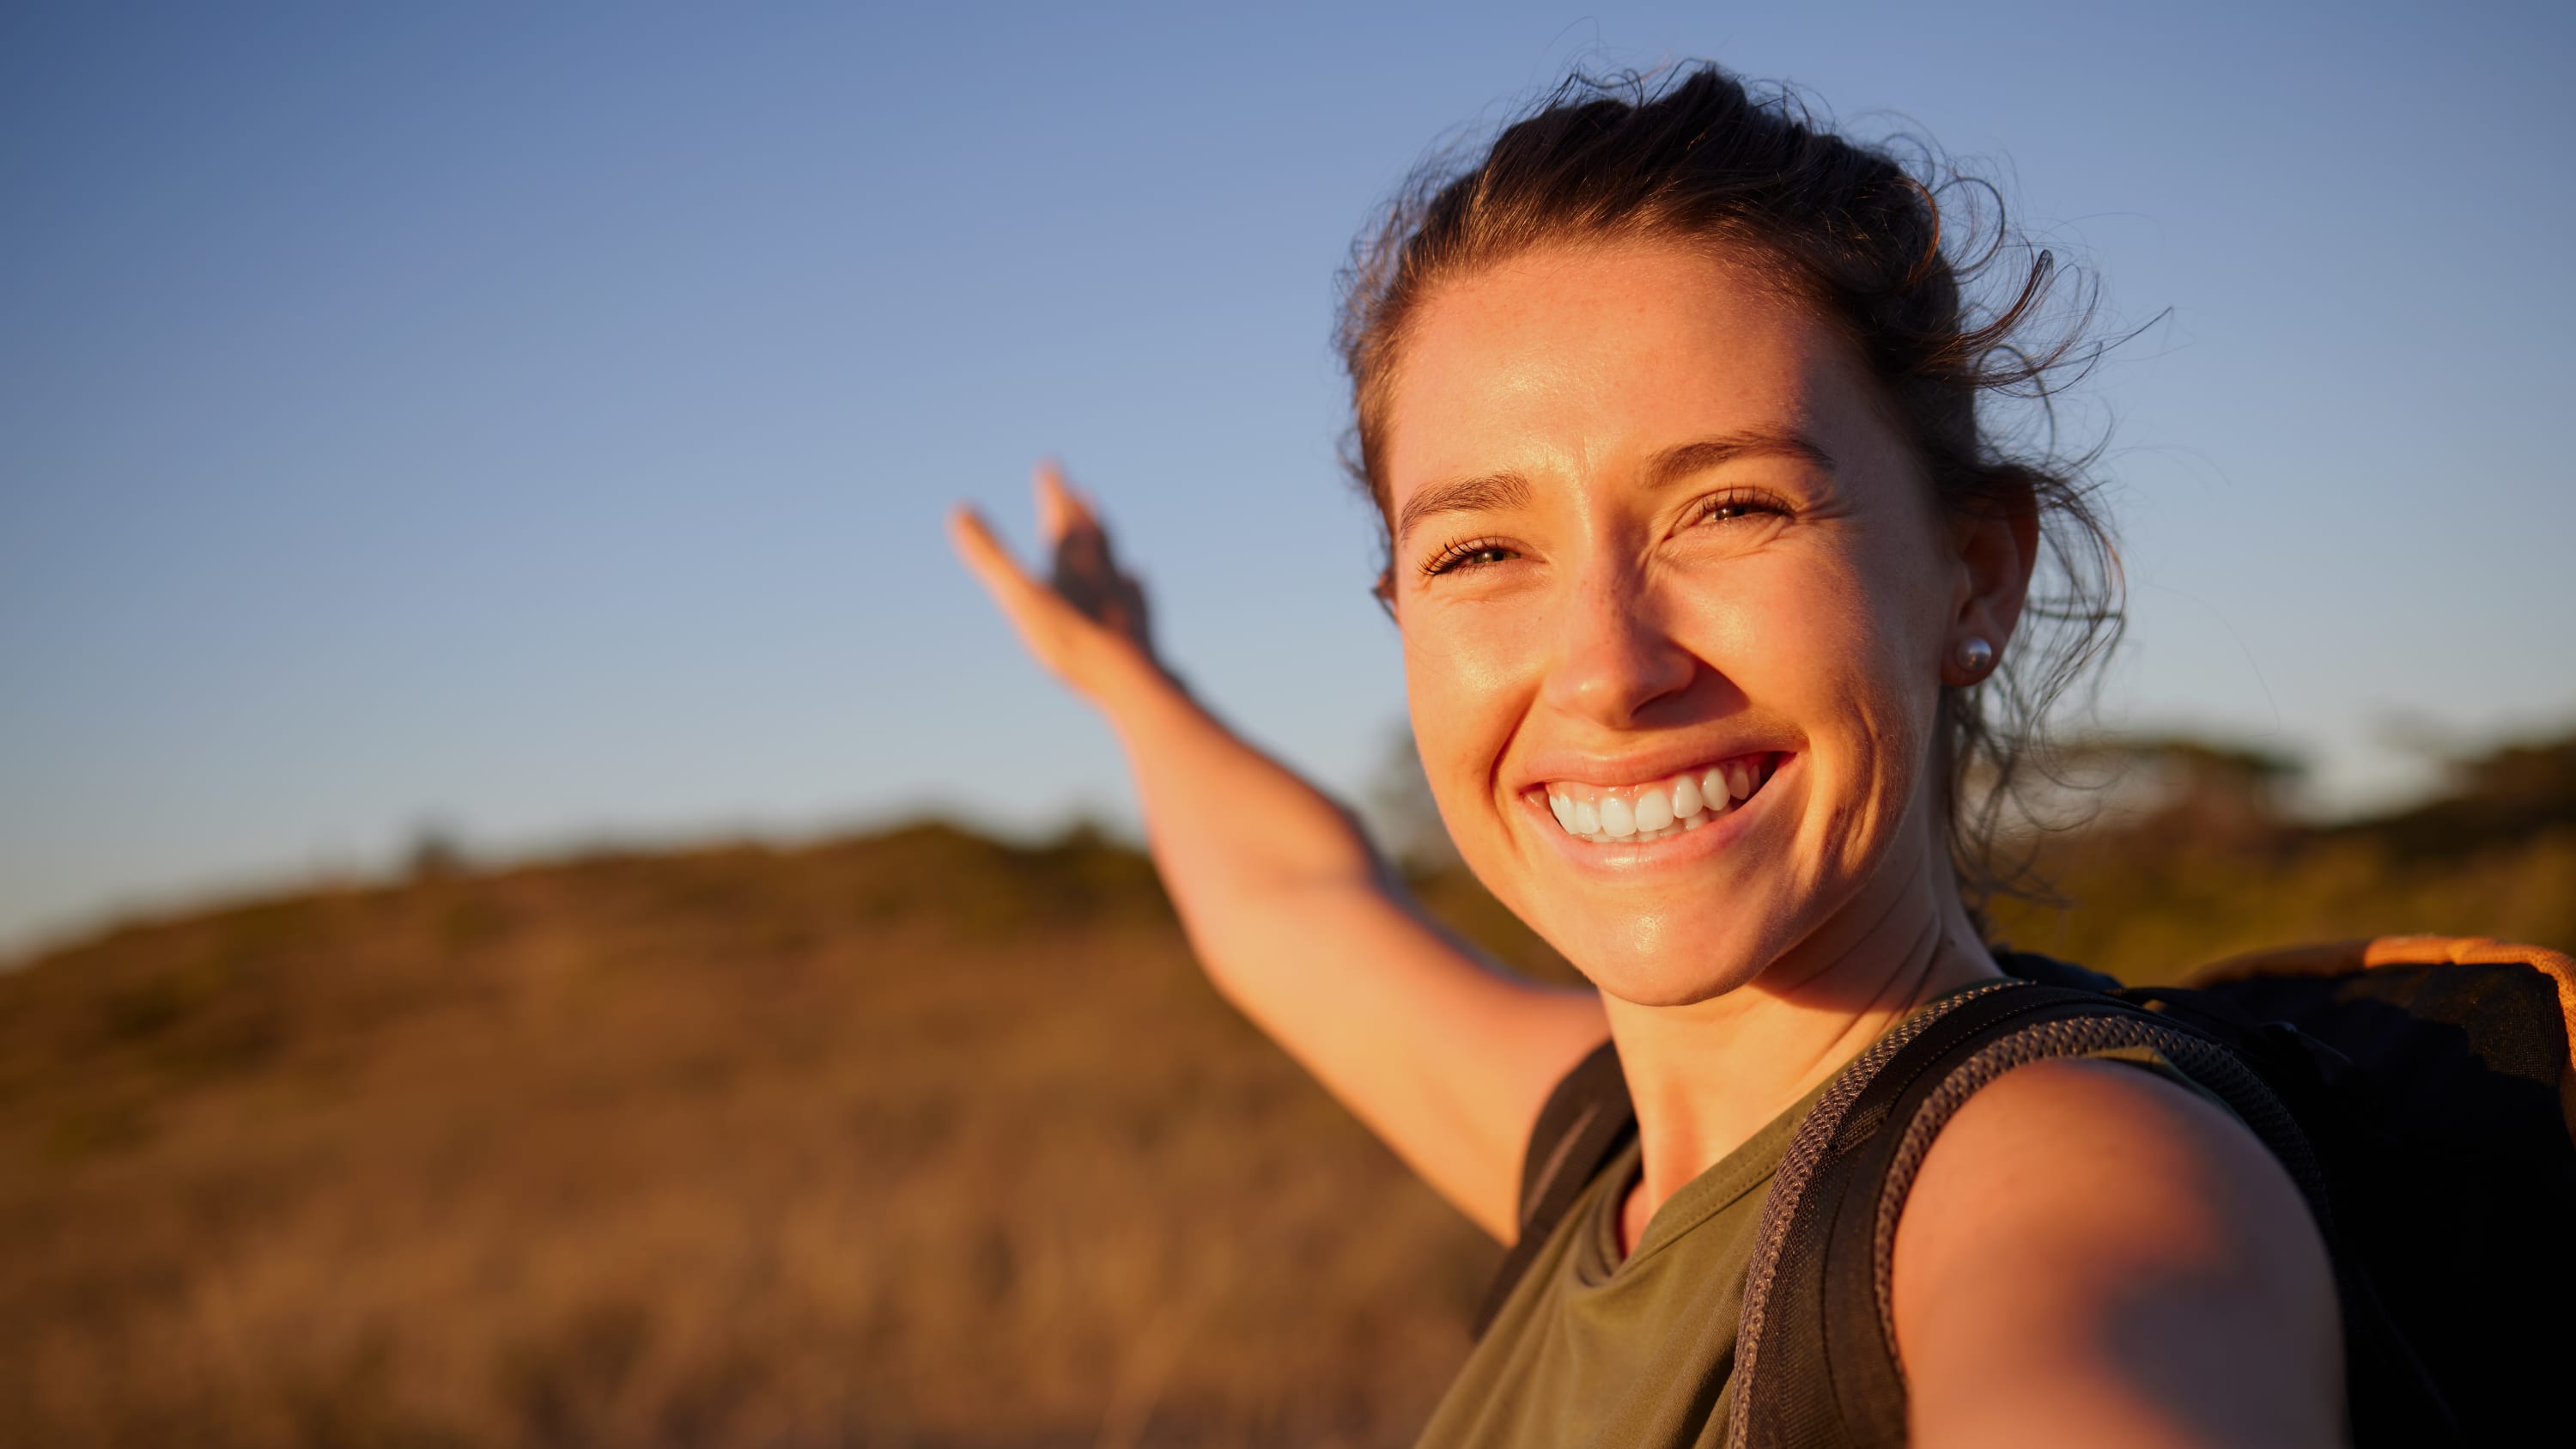 woman smiling in a field after uterine fibroid embolization for fibroids